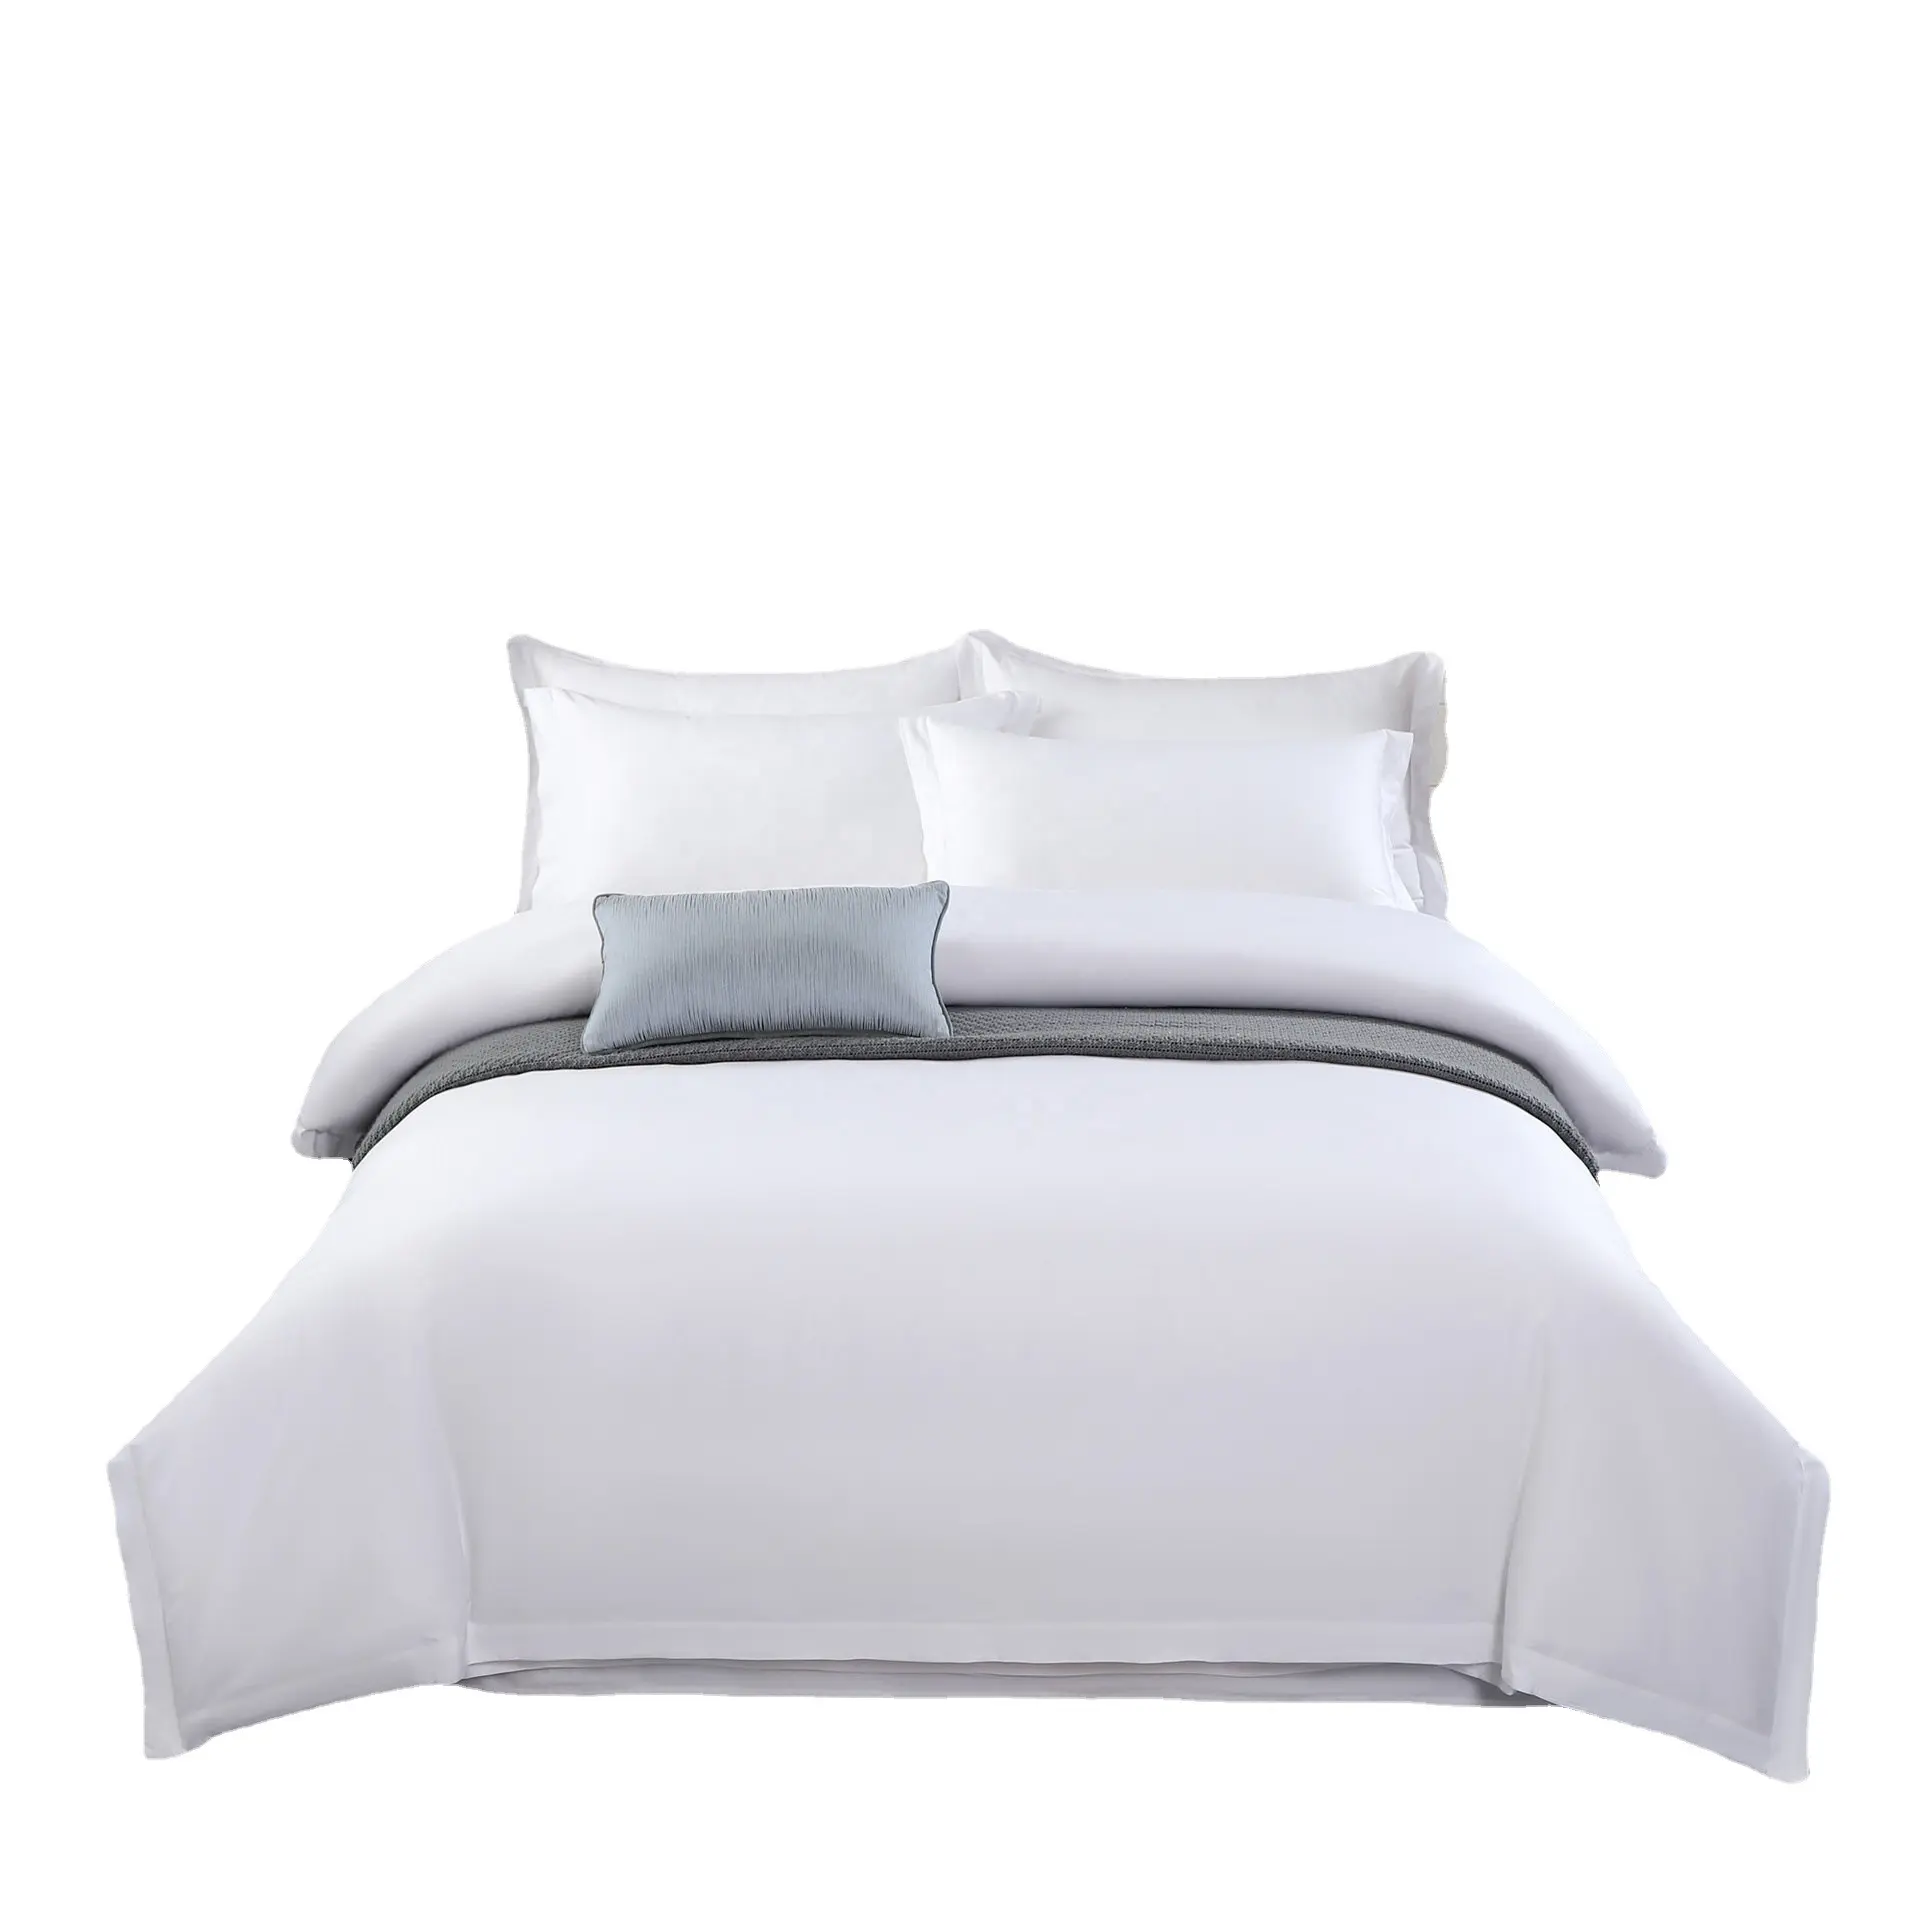 100% Cotton Hotel Duvet Cover Set Queen-Sized Solid Color Comforter with Bedding Sheets King Size